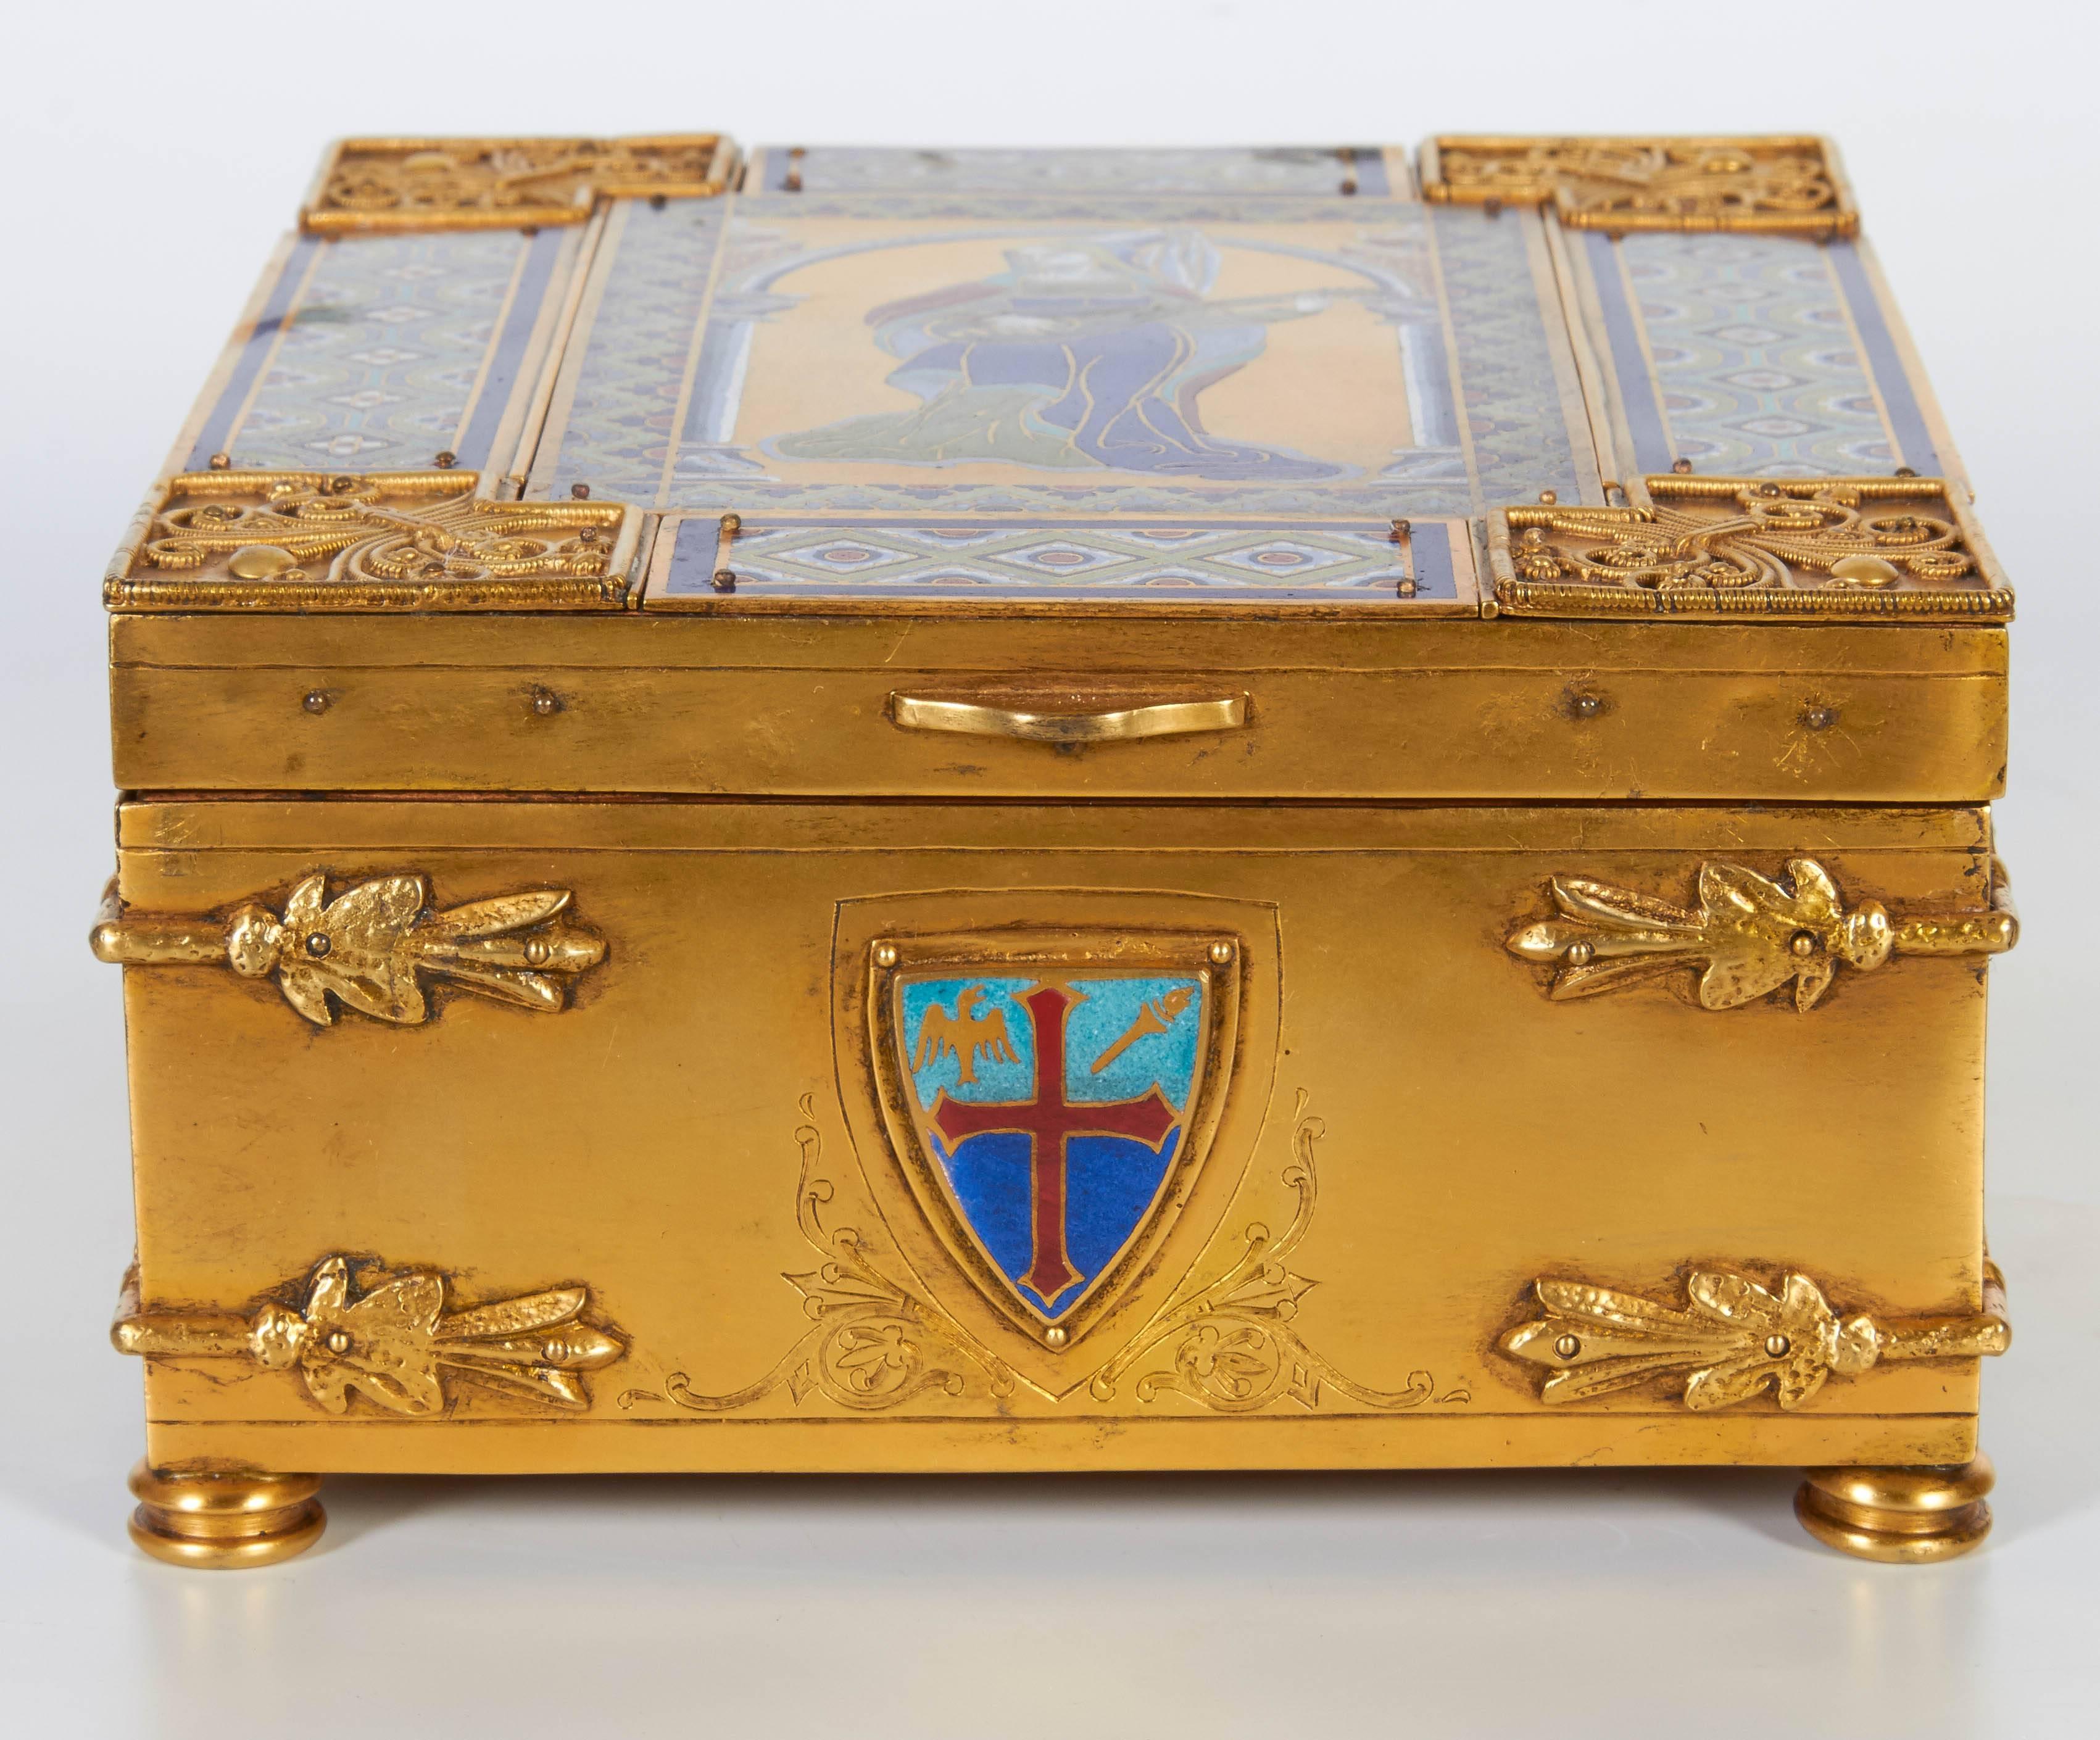 An American Gothic Revival bronze and enamelled box/humidor.
By Edward F. Caldwell & Co. Inc., New York, first quarter of 1900s. 
The rectangular hinged top decorated with a lady playing a guitar, opening to a box finely lined with special wood to